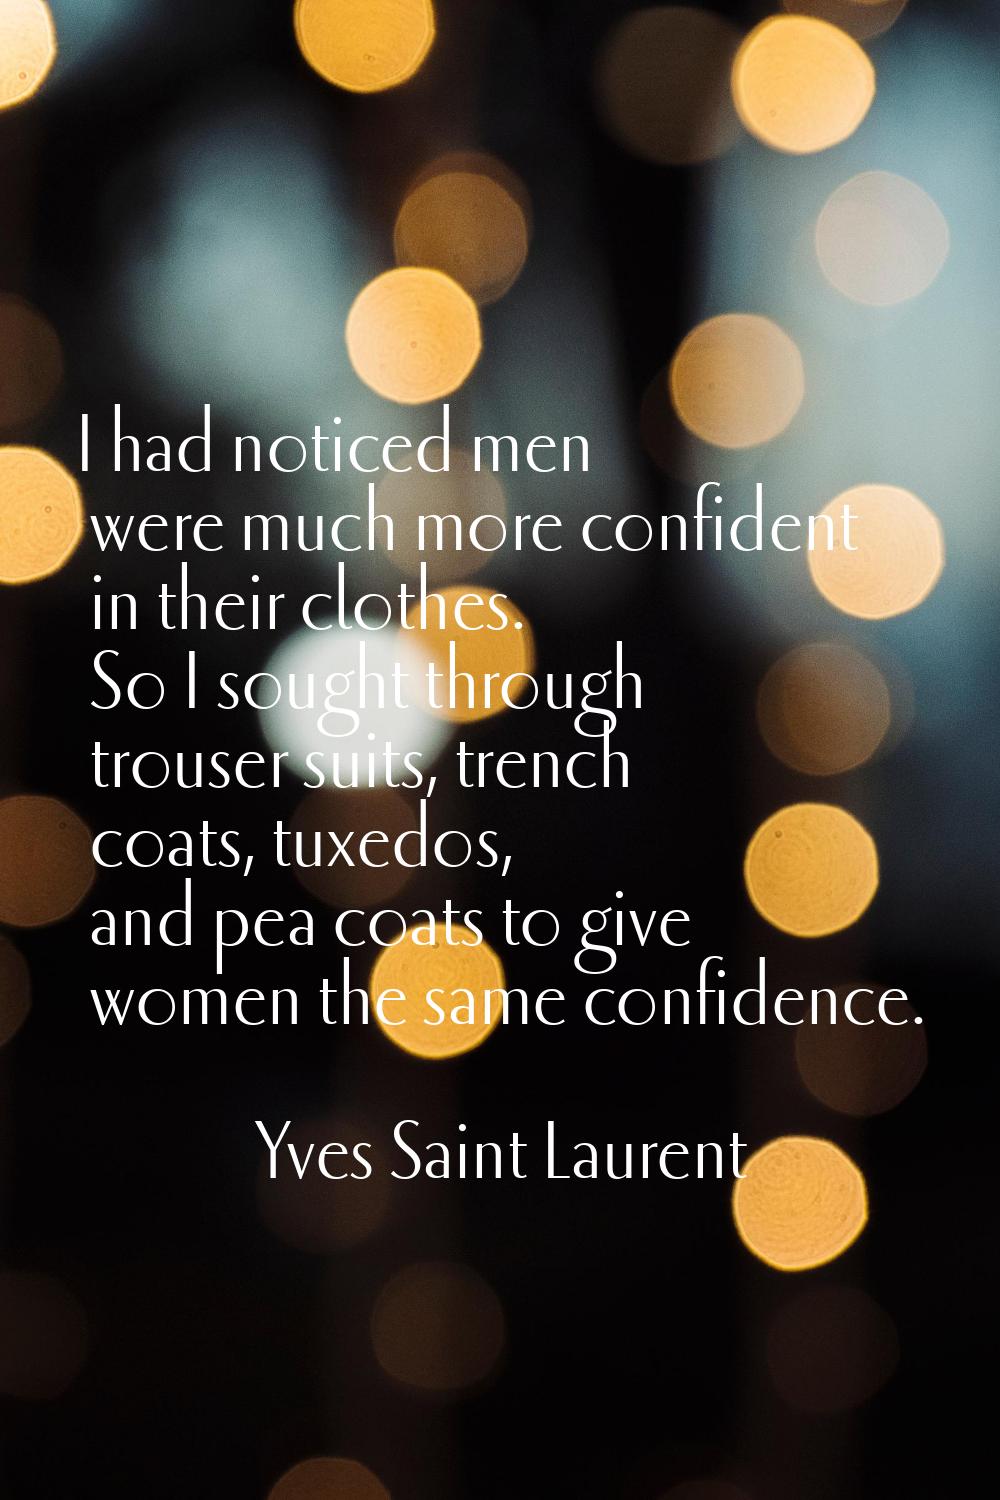 I had noticed men were much more confident in their clothes. So I sought through trouser suits, tre